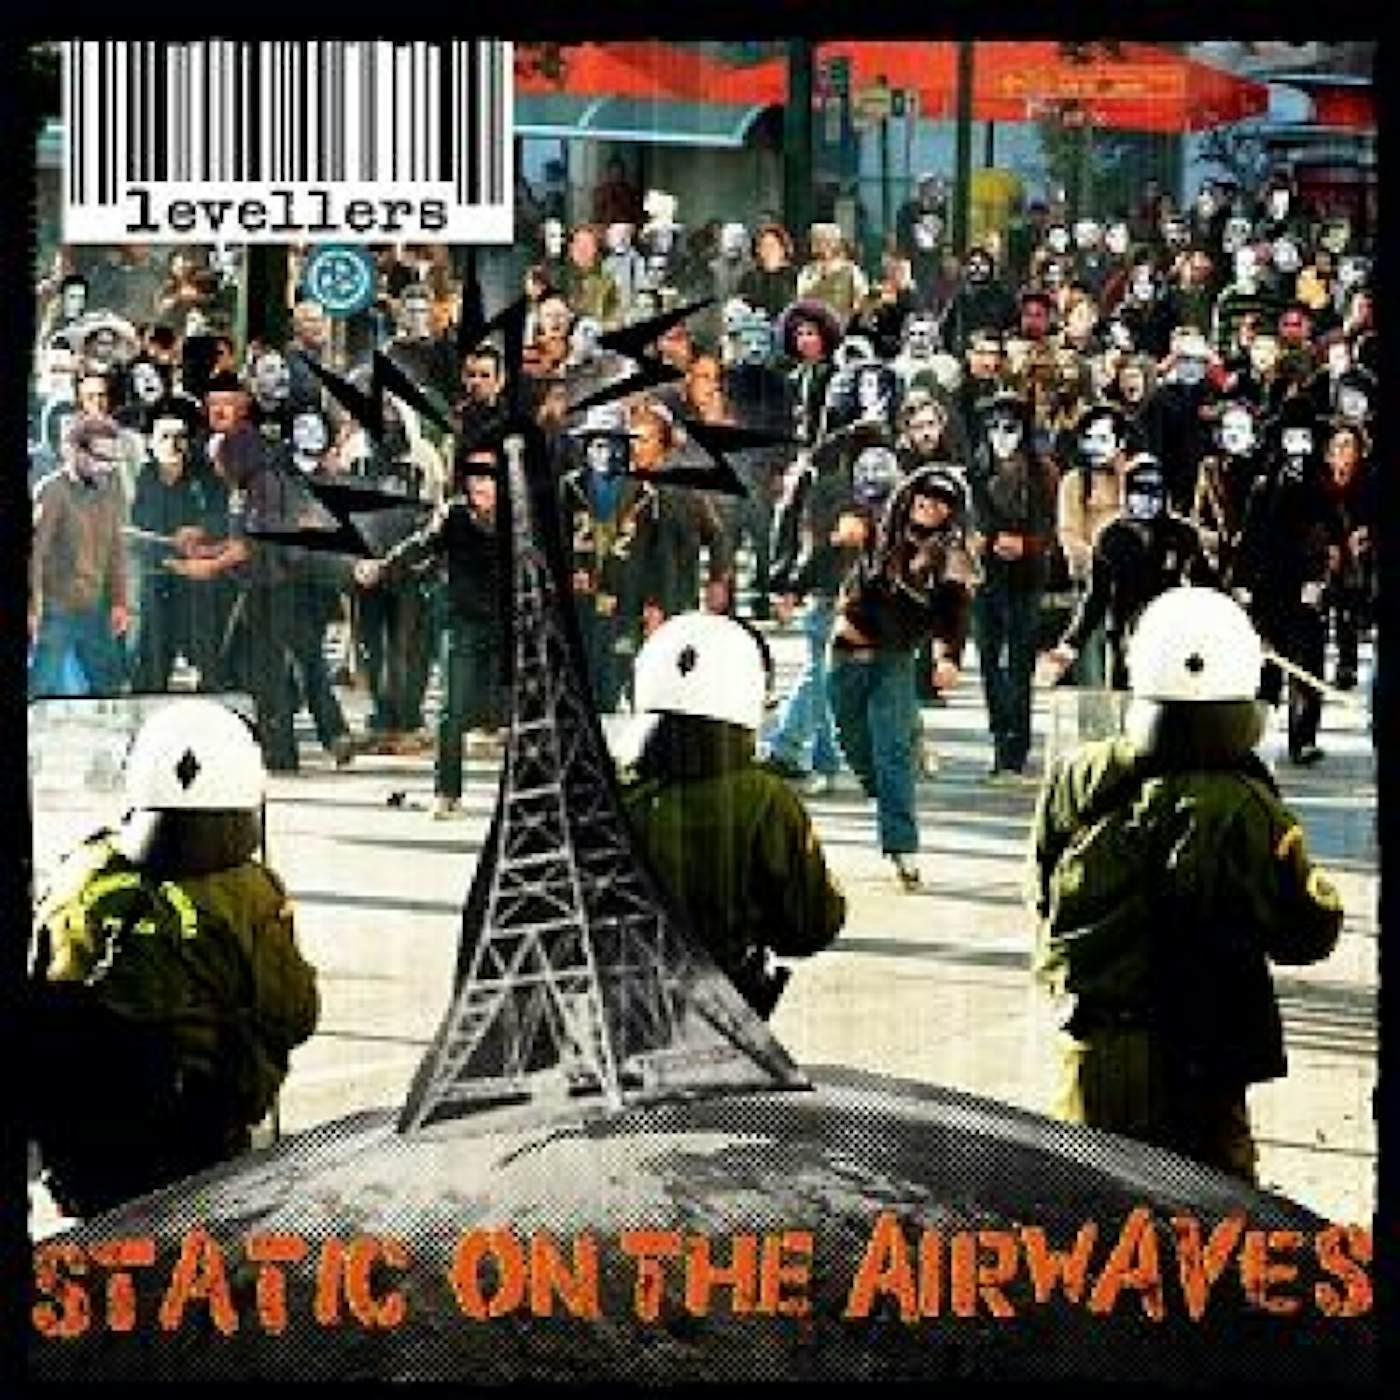 Levellers STATIC ON THE AIRWAVES Vinyl Record